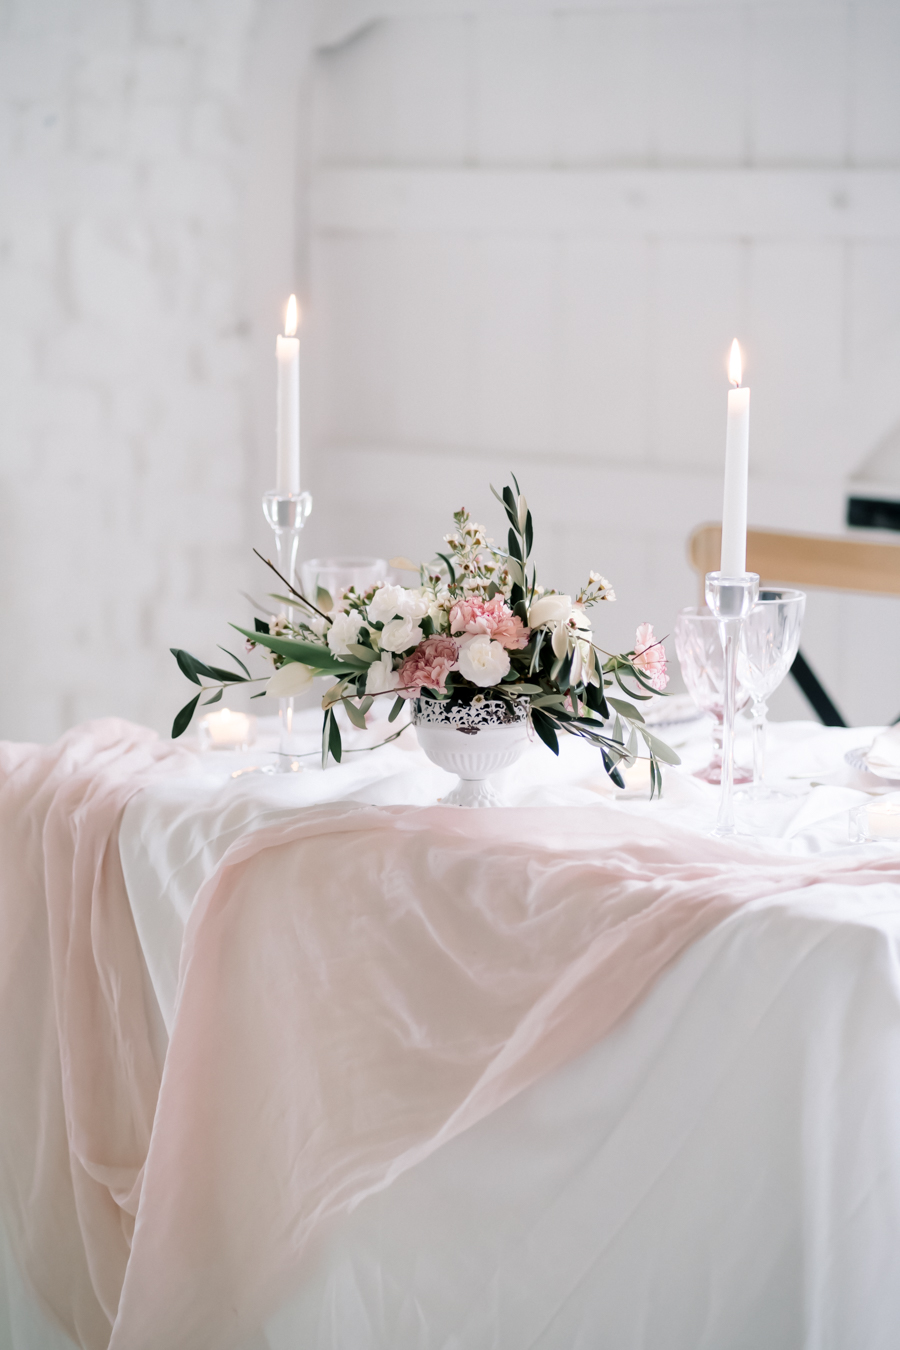 Spring blossom wedding style inspiration and ideas with Chloe Ely Photography at Barton Court (42)